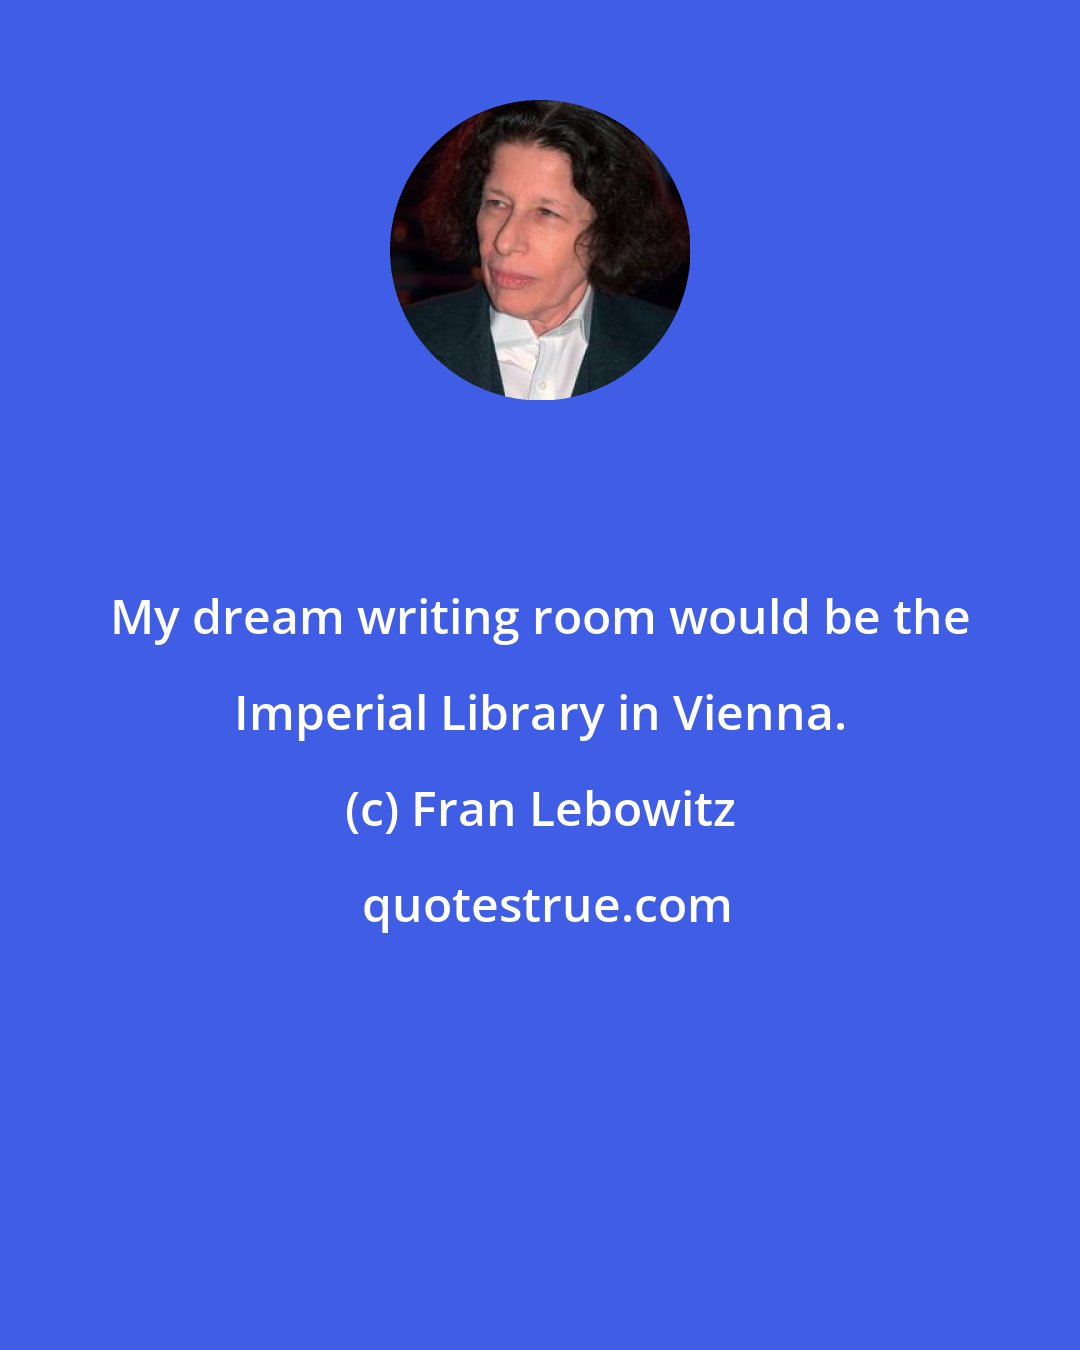 Fran Lebowitz: My dream writing room would be the Imperial Library in Vienna.